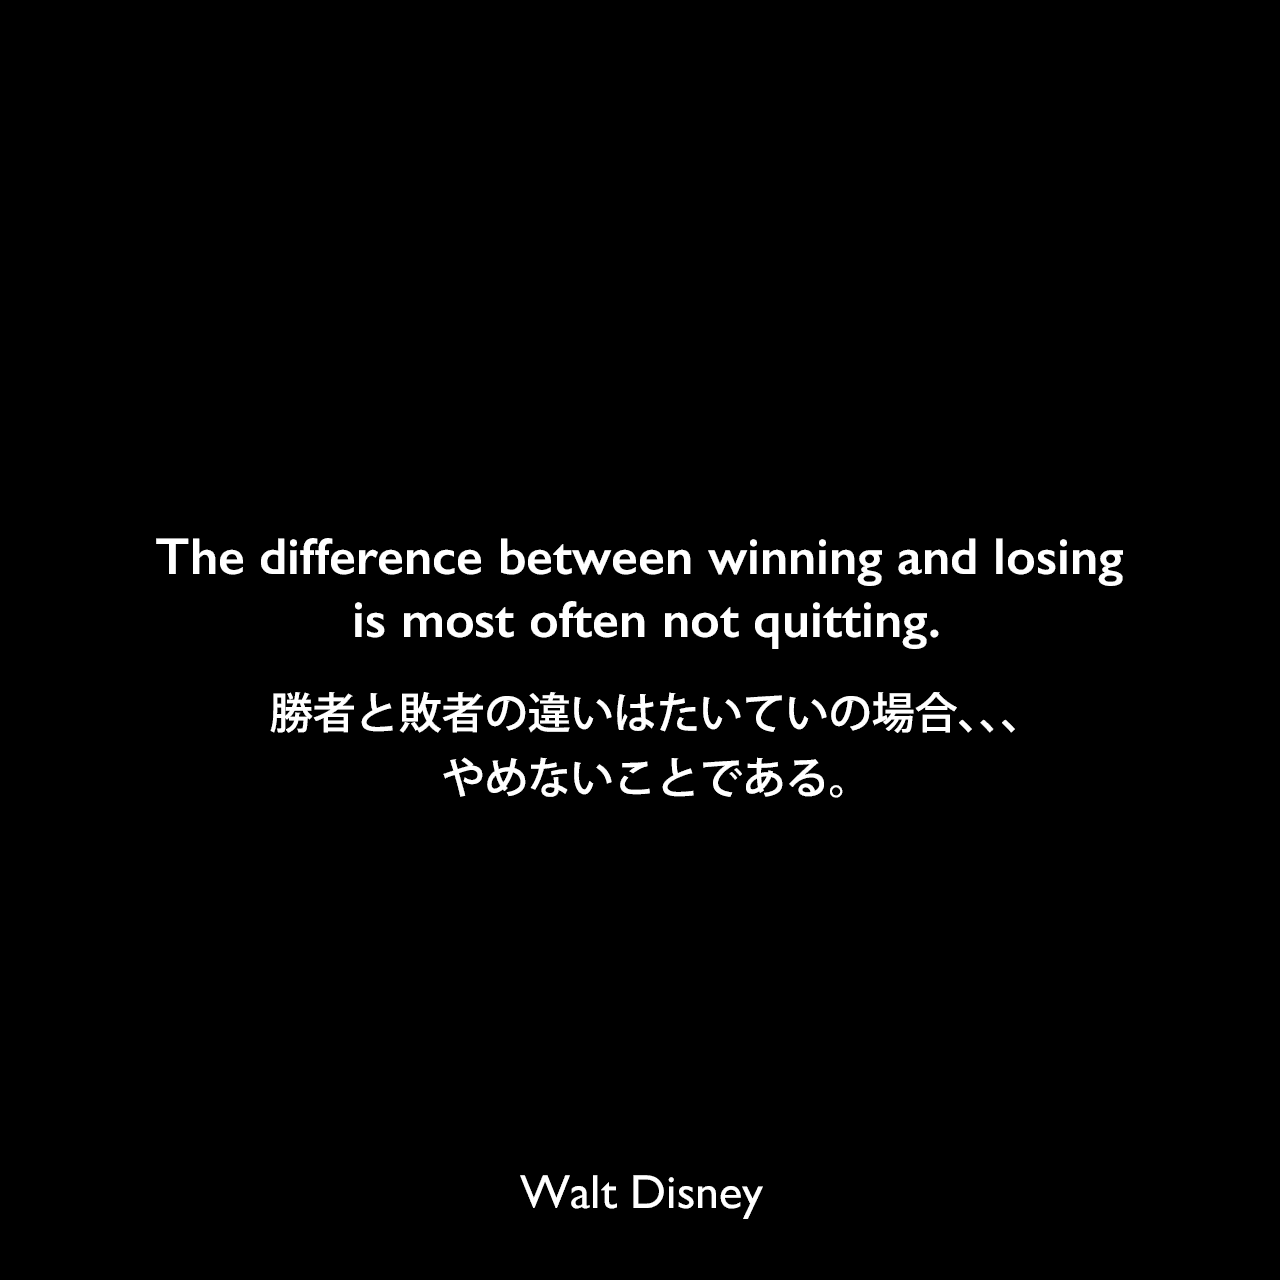 The difference between winning and losing is most often not quitting.勝者と敗者の違いはたいていの場合、、、やめないことである。